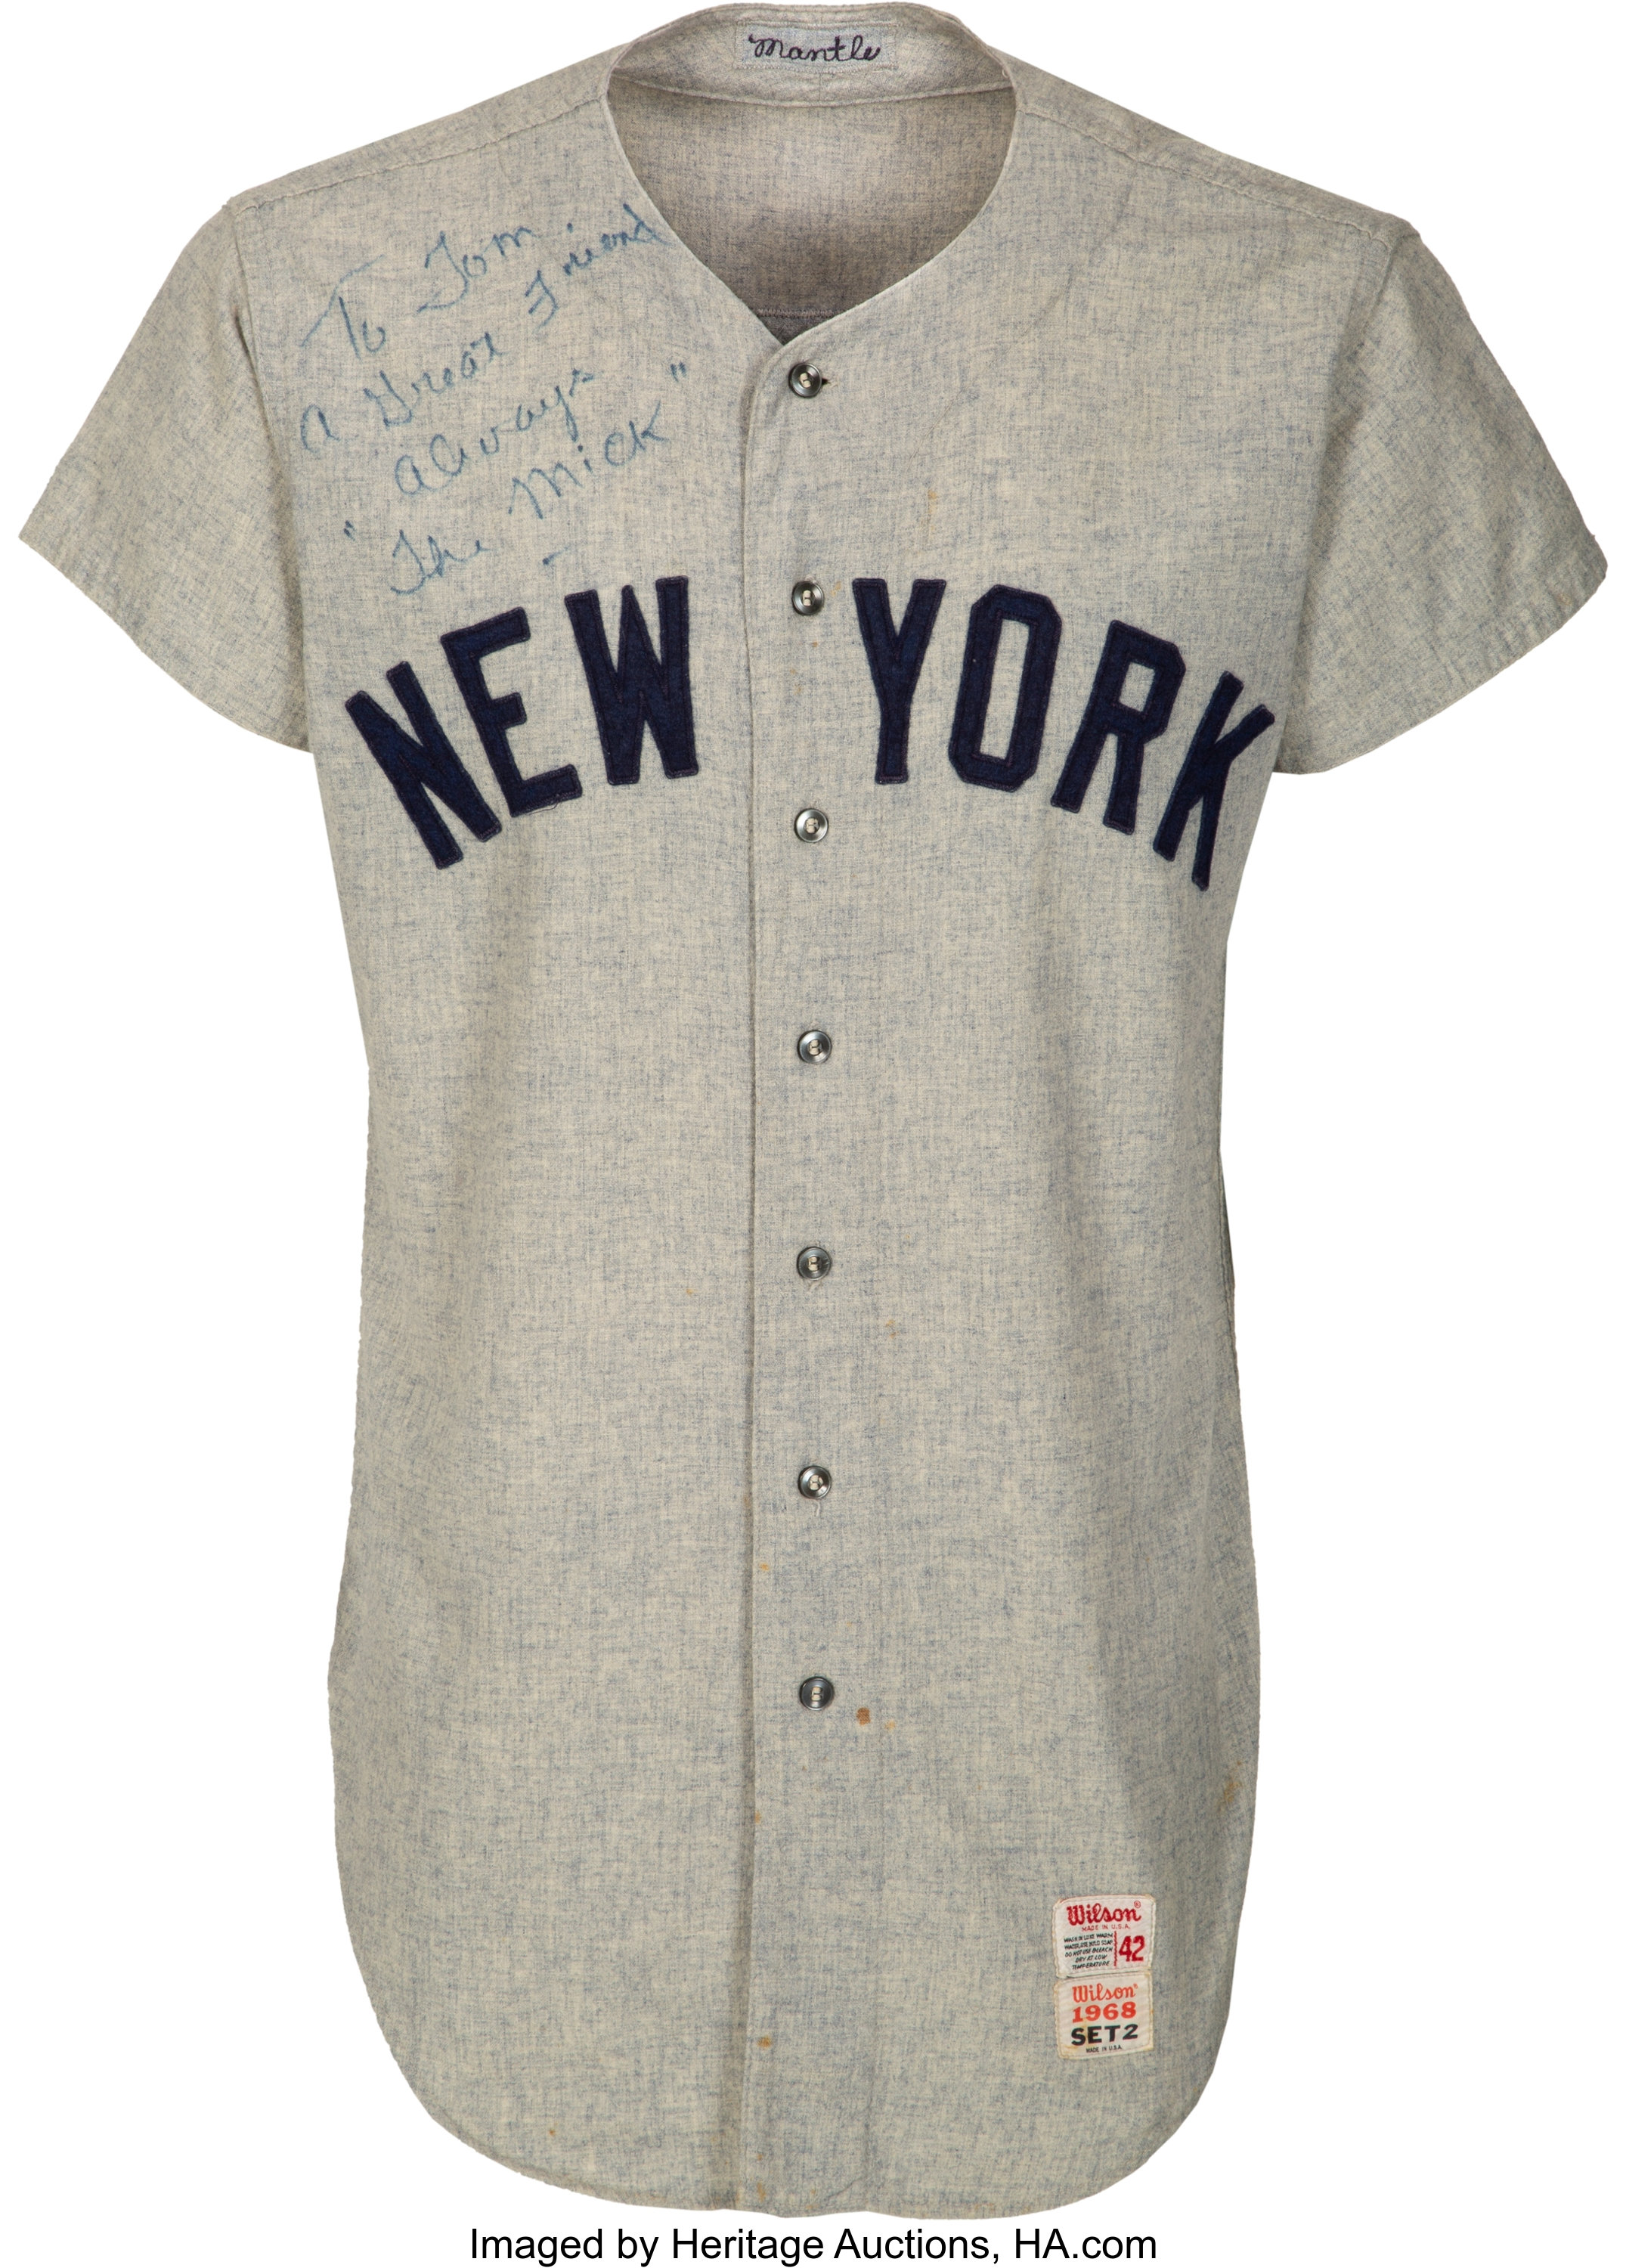 Sold at Auction: Mickey Mantle autographed New York Yankees jersey.